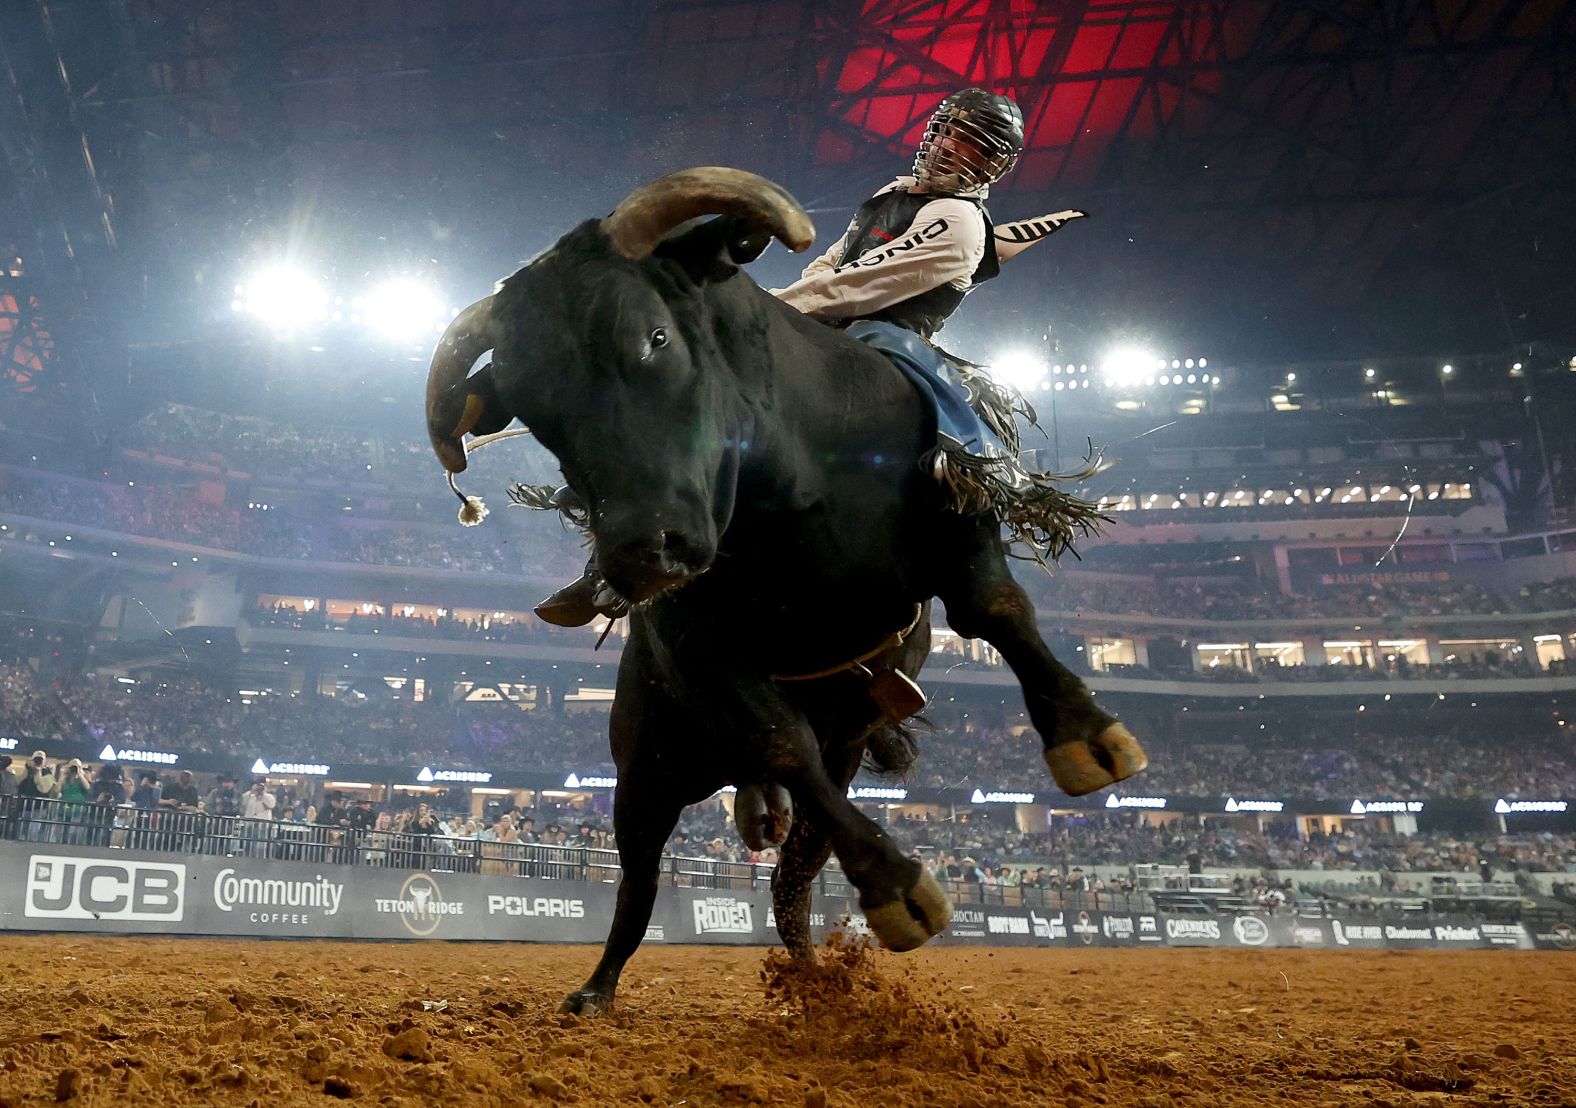 Jeff Askey, riding County Jail, competes in the bull riding event at The American Rodeo in Arlington, Texas, on Saturday, March 9.